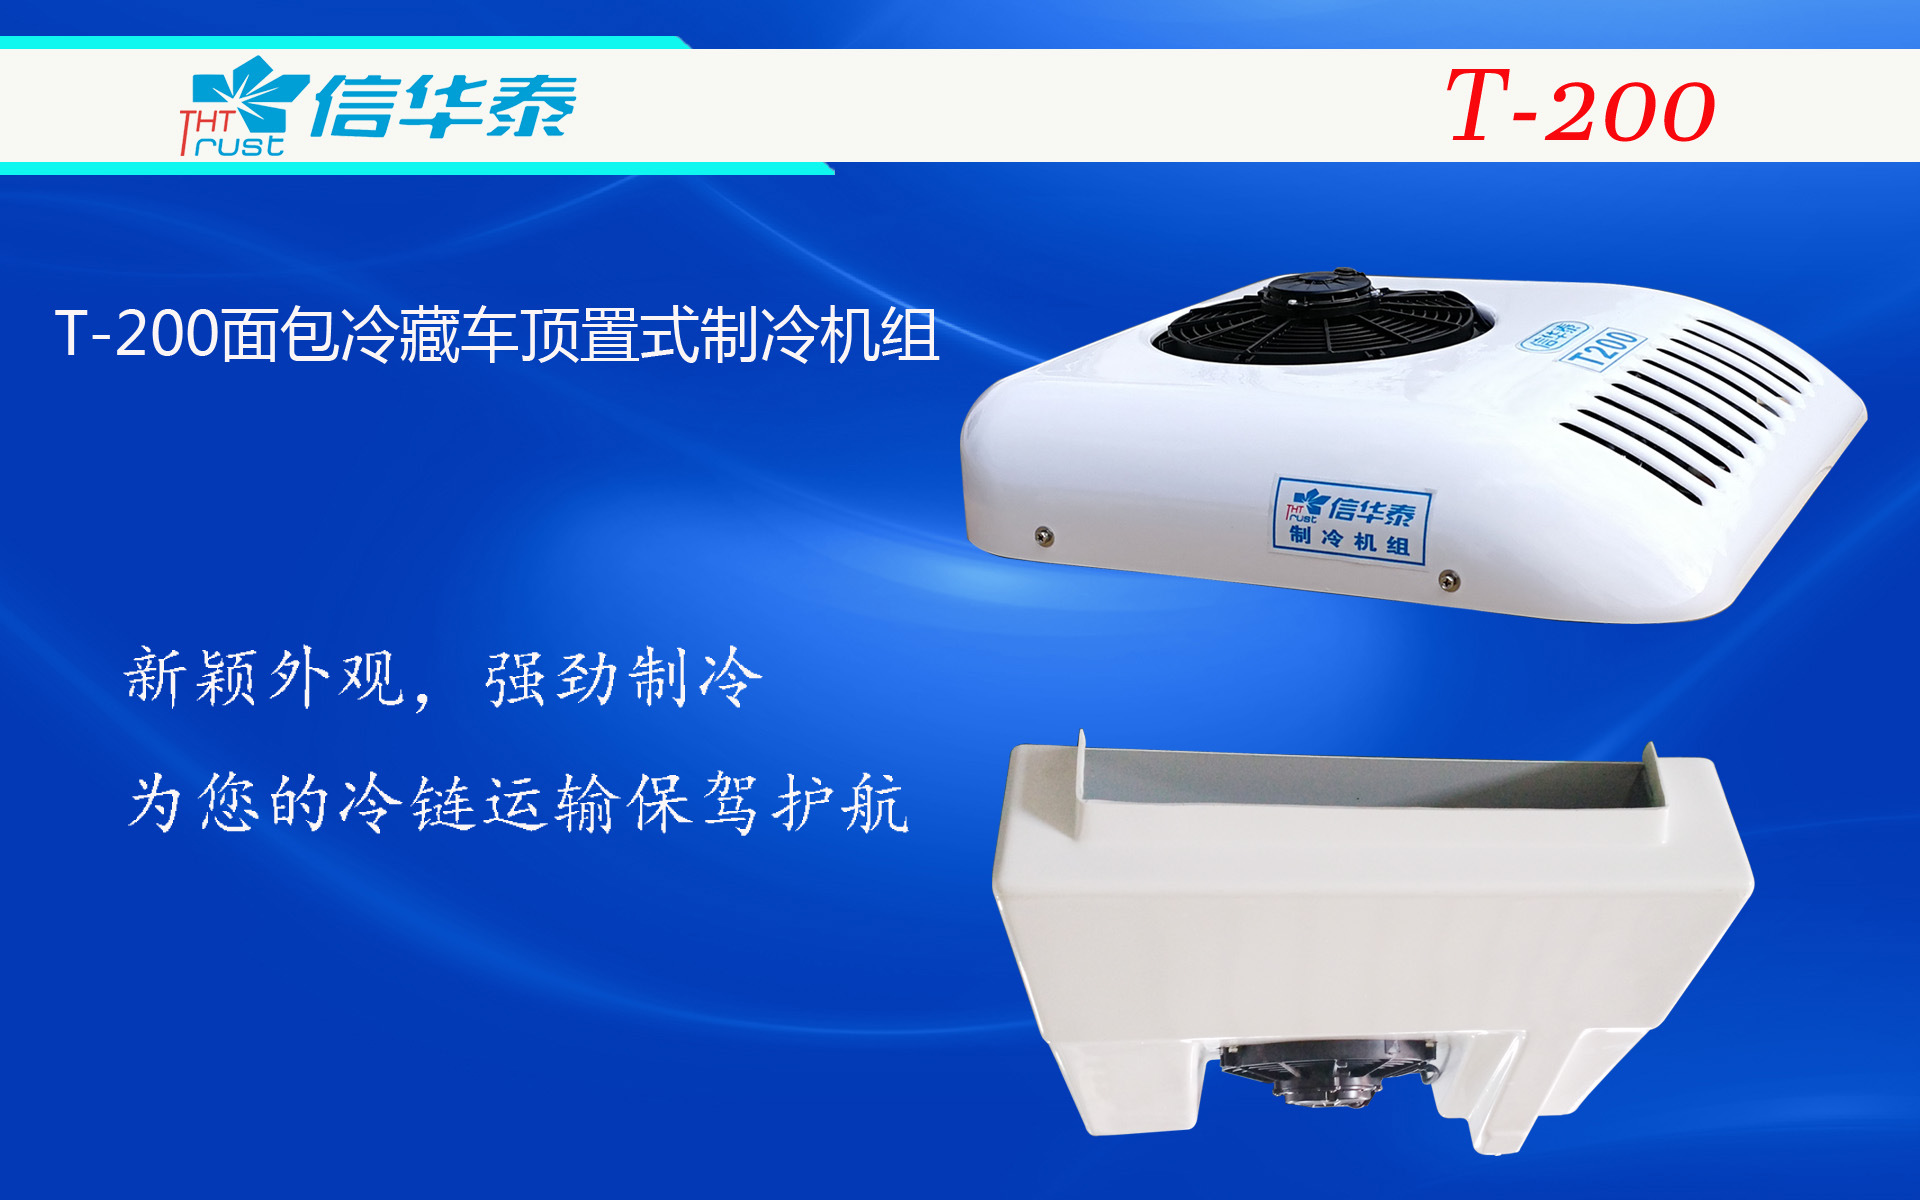 bread Cold storage roof Cooling Crew T-200